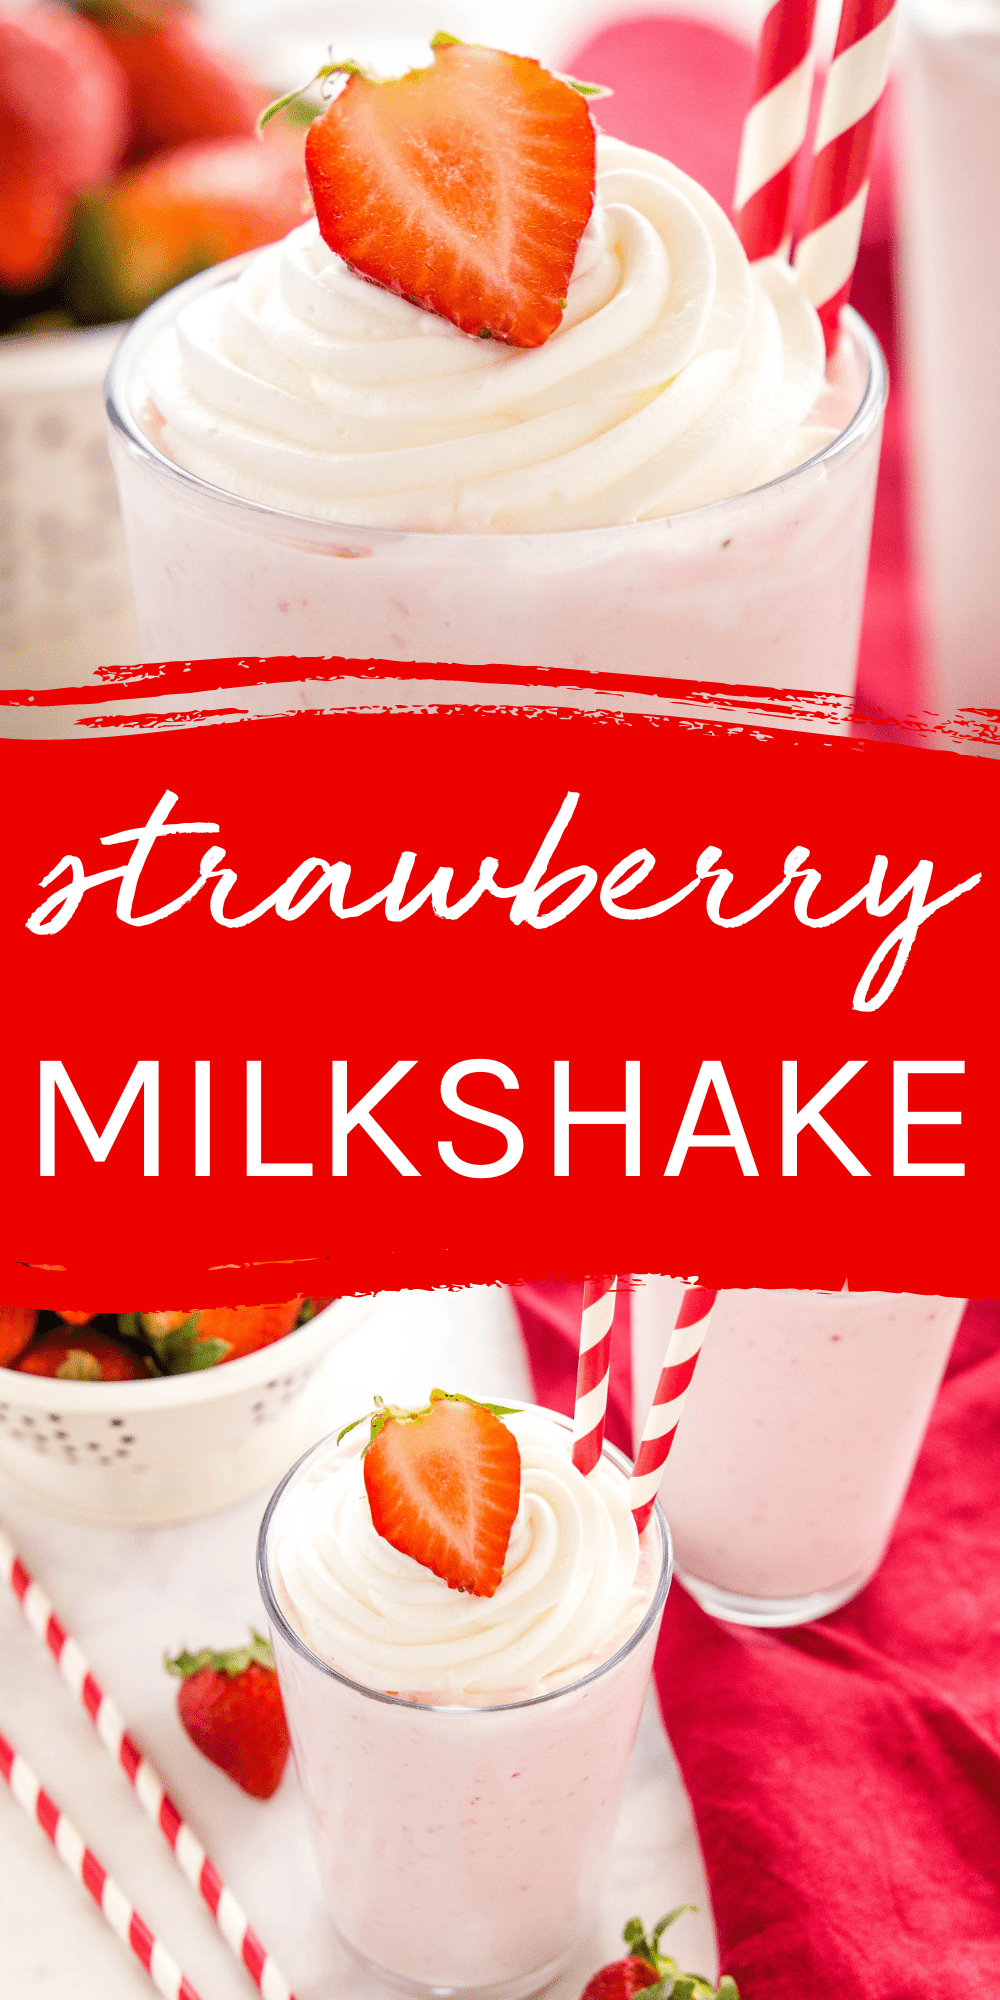 This Strawberry Milkshake recipe is a cool, creamy, smooth, and indulgent treat with an intense strawberry flavour. Only 3 basic ingredients! Recipe from thebusybaker.ca! #strawberrymilkshake #strawberrymilkshakerecipe #easymilkshake #bestmilkshakerecipe #homemademilkshake via @busybakerblog